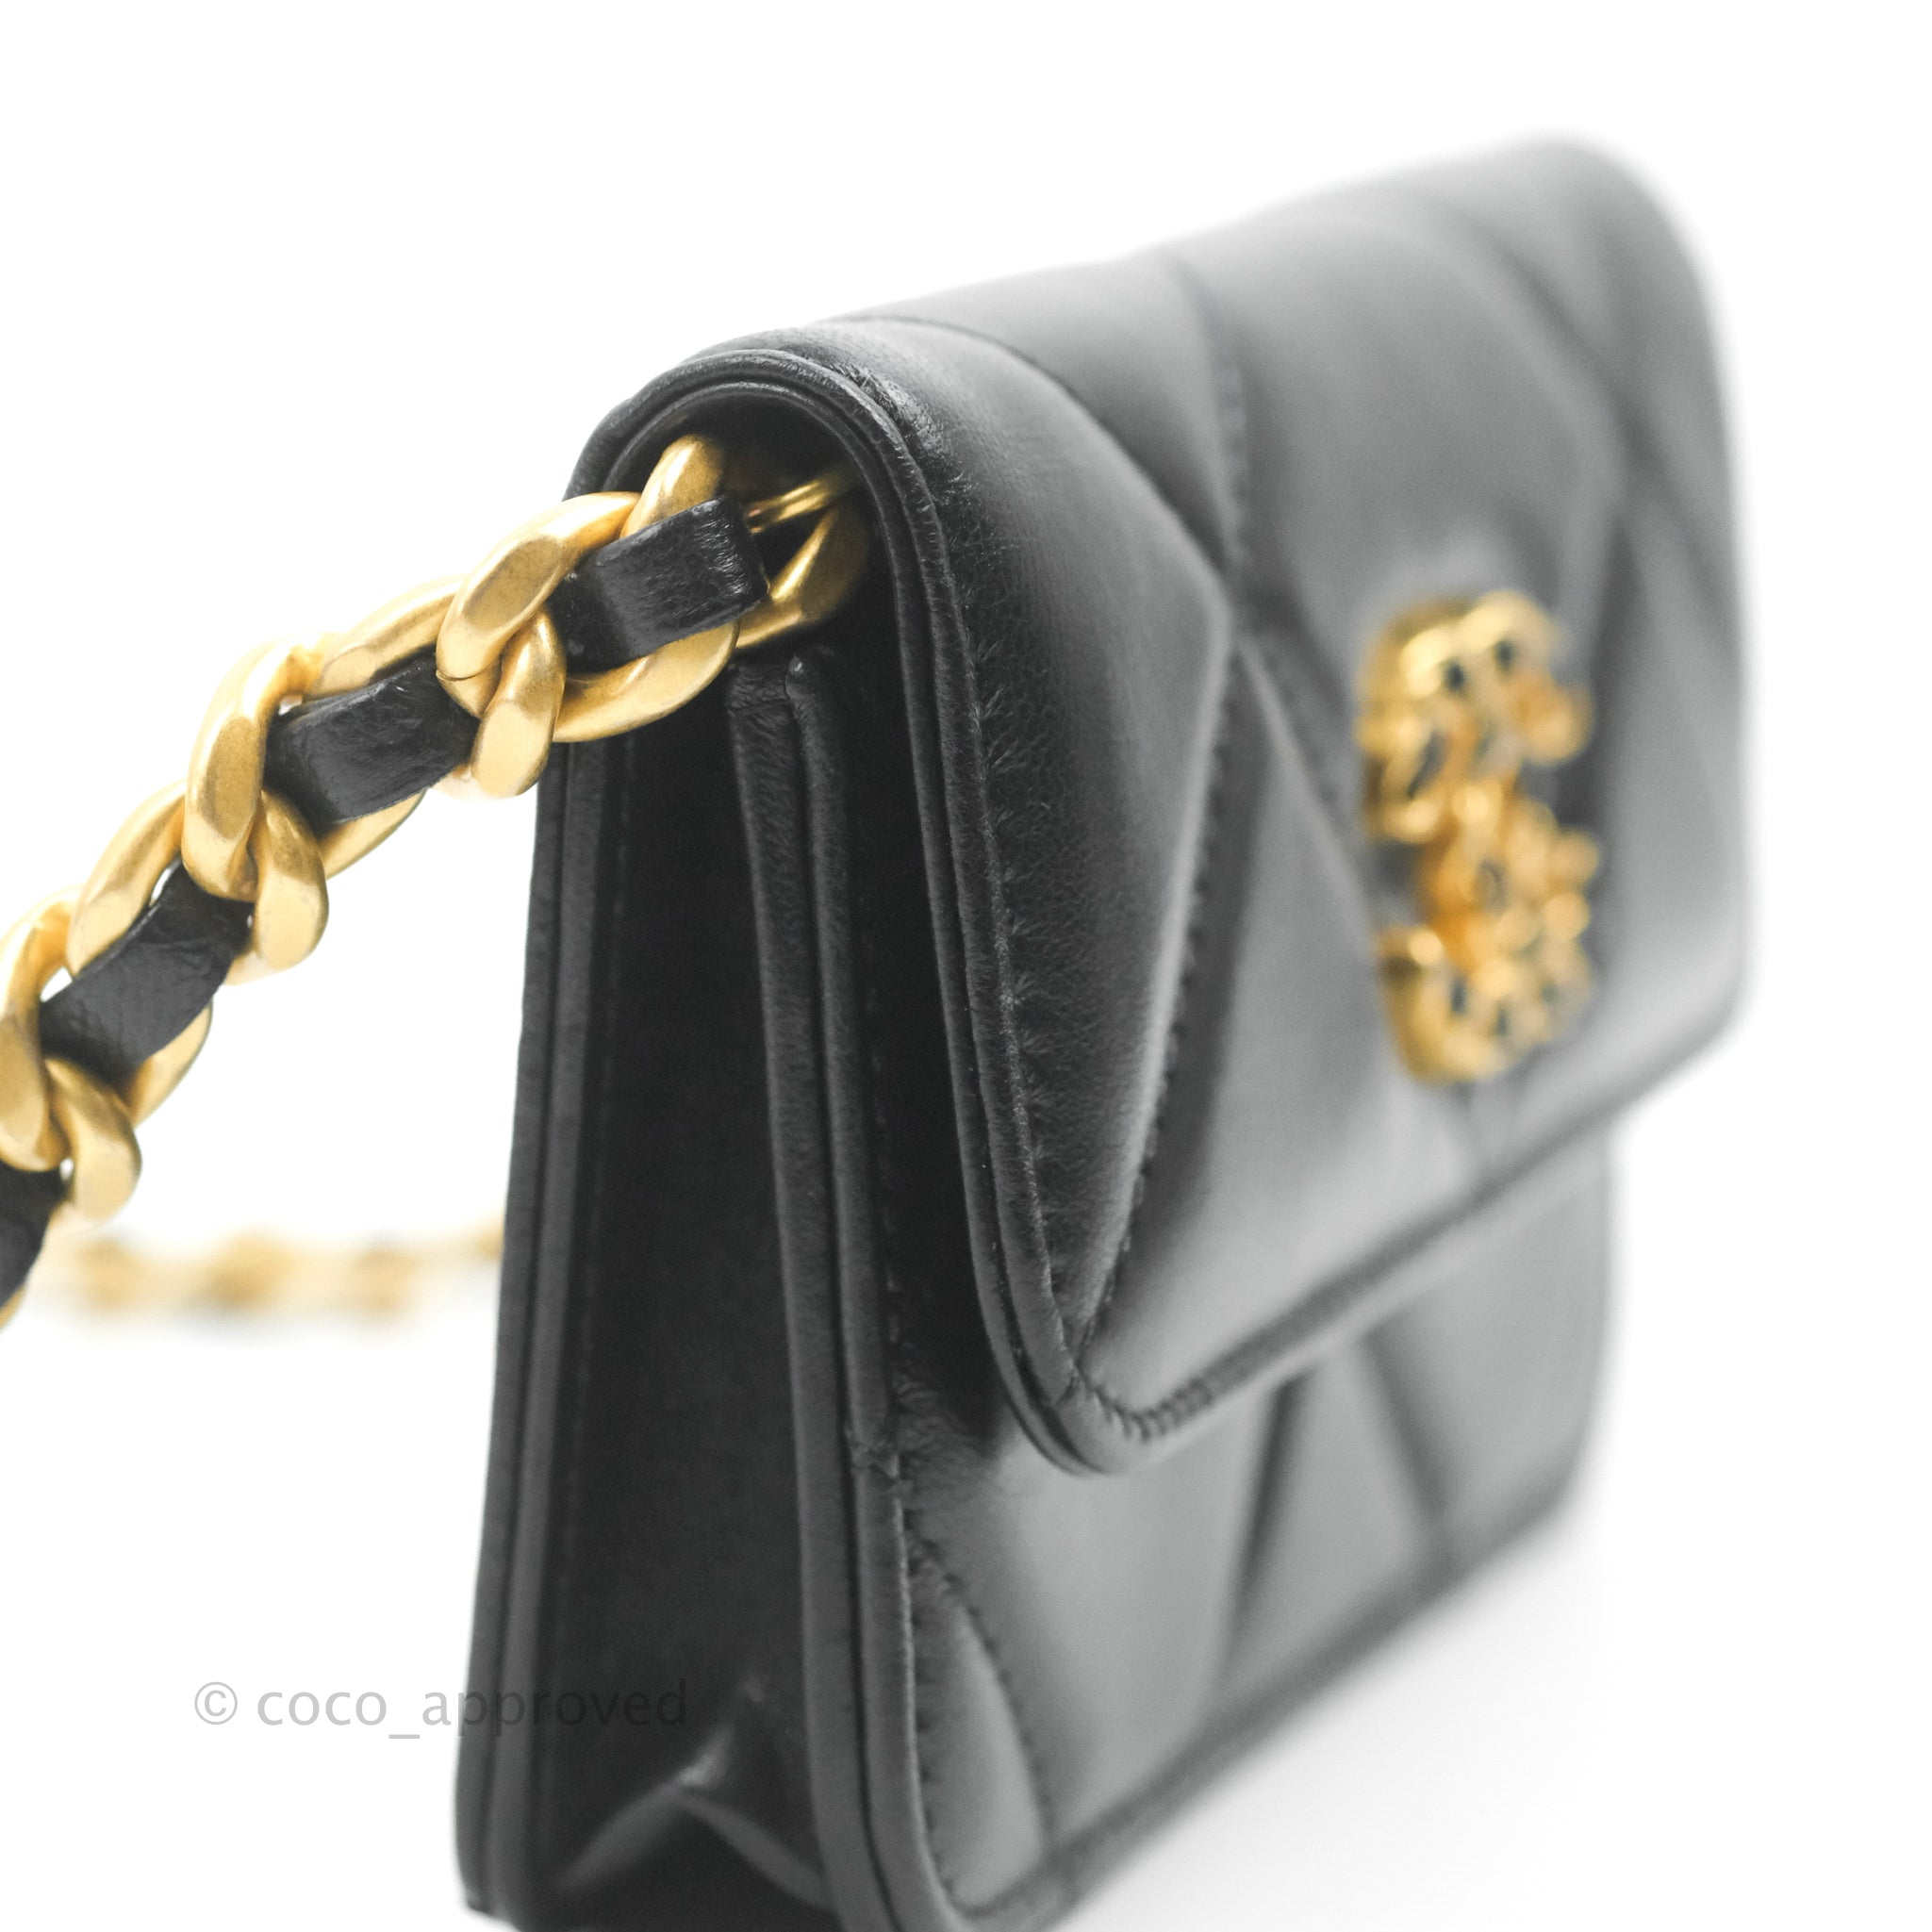 Chanel 19 Classic Clutch with Chain Gold Hardware Black - NOBLEMARS